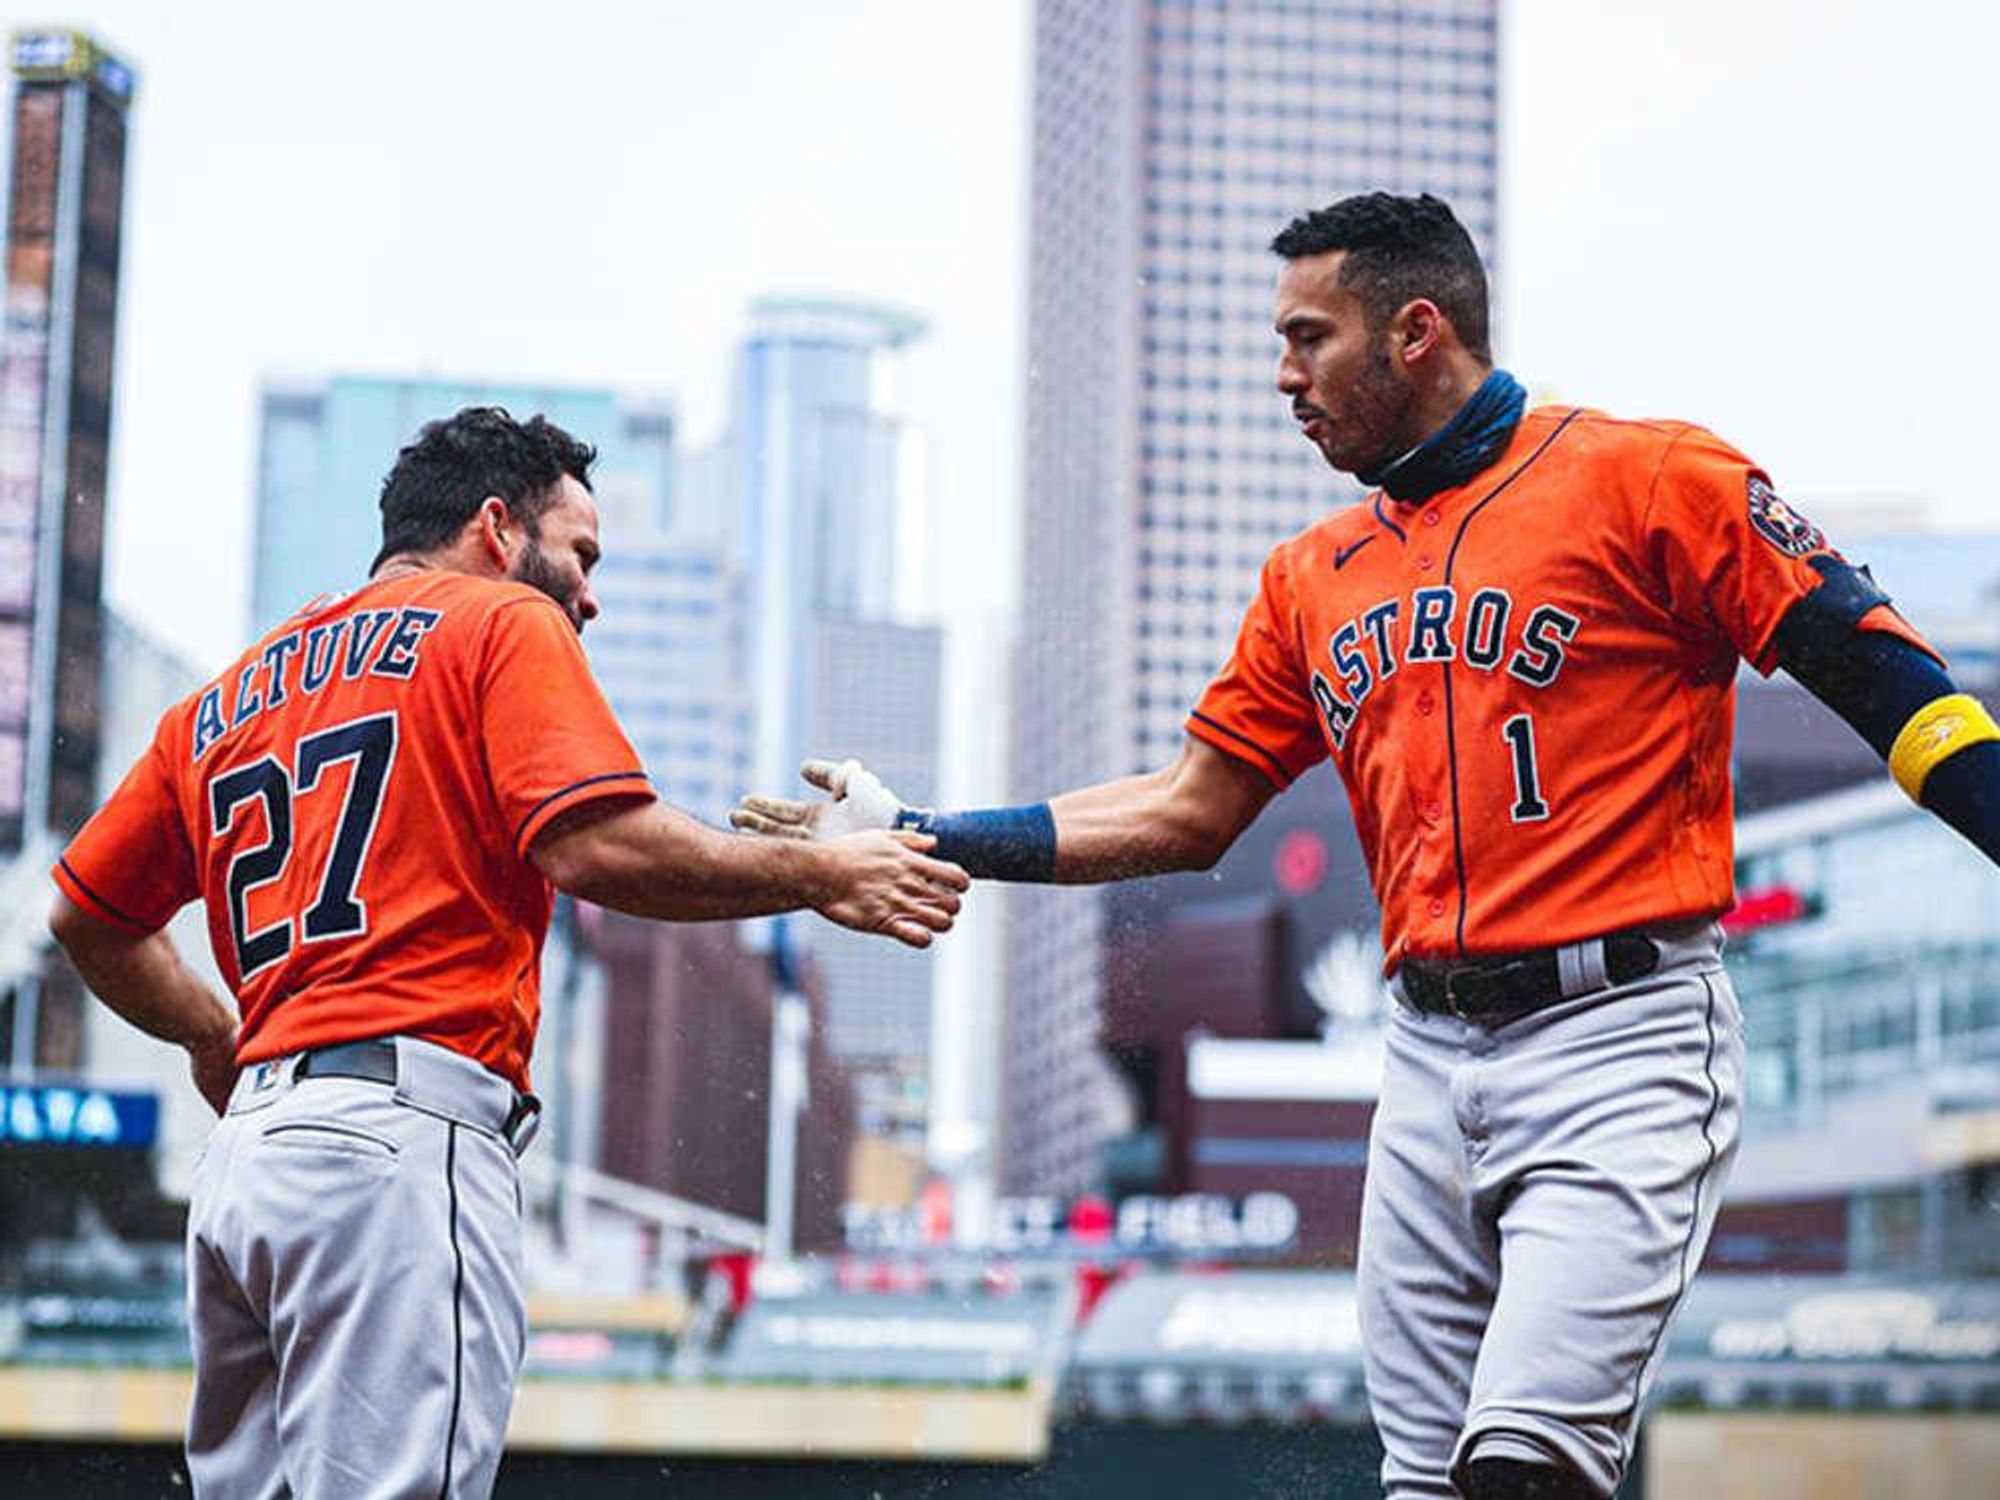 Houston Astros - Bringing our Space City energy to their place